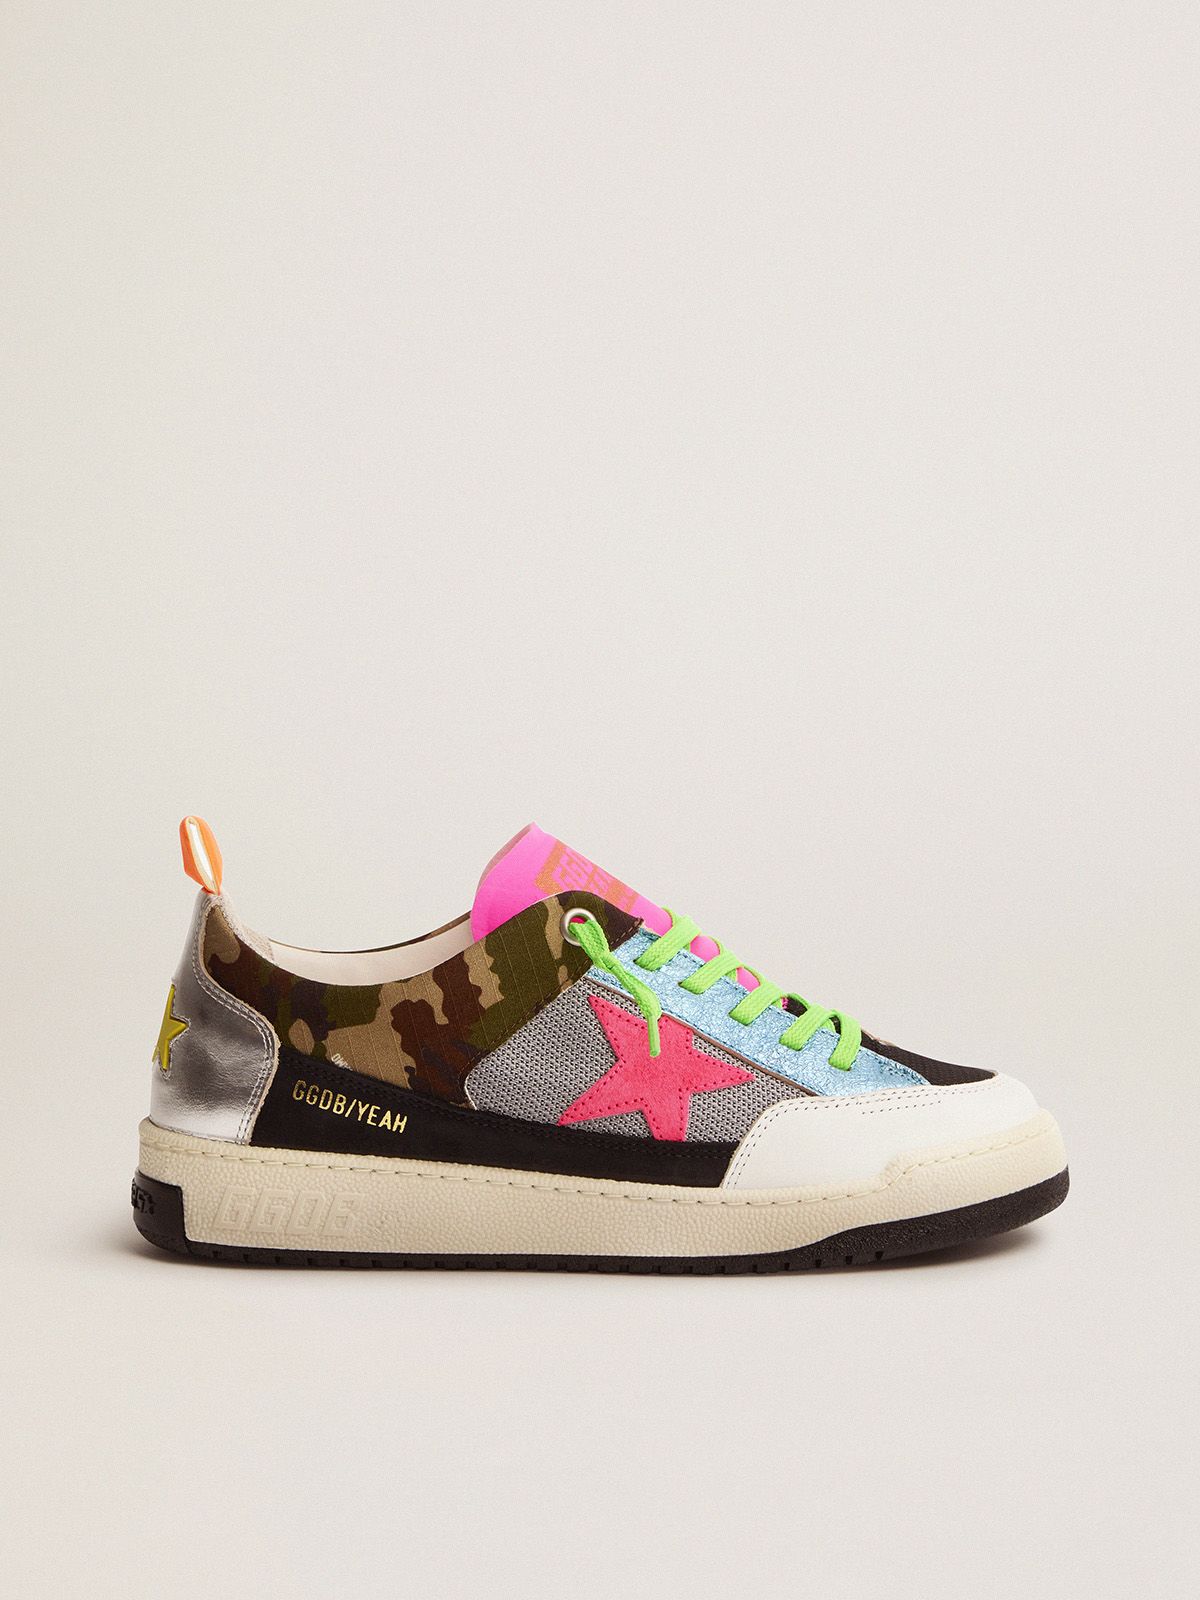 Golden Goose Superstar Women’s camouflage Yeah sneakers with fuchsia star